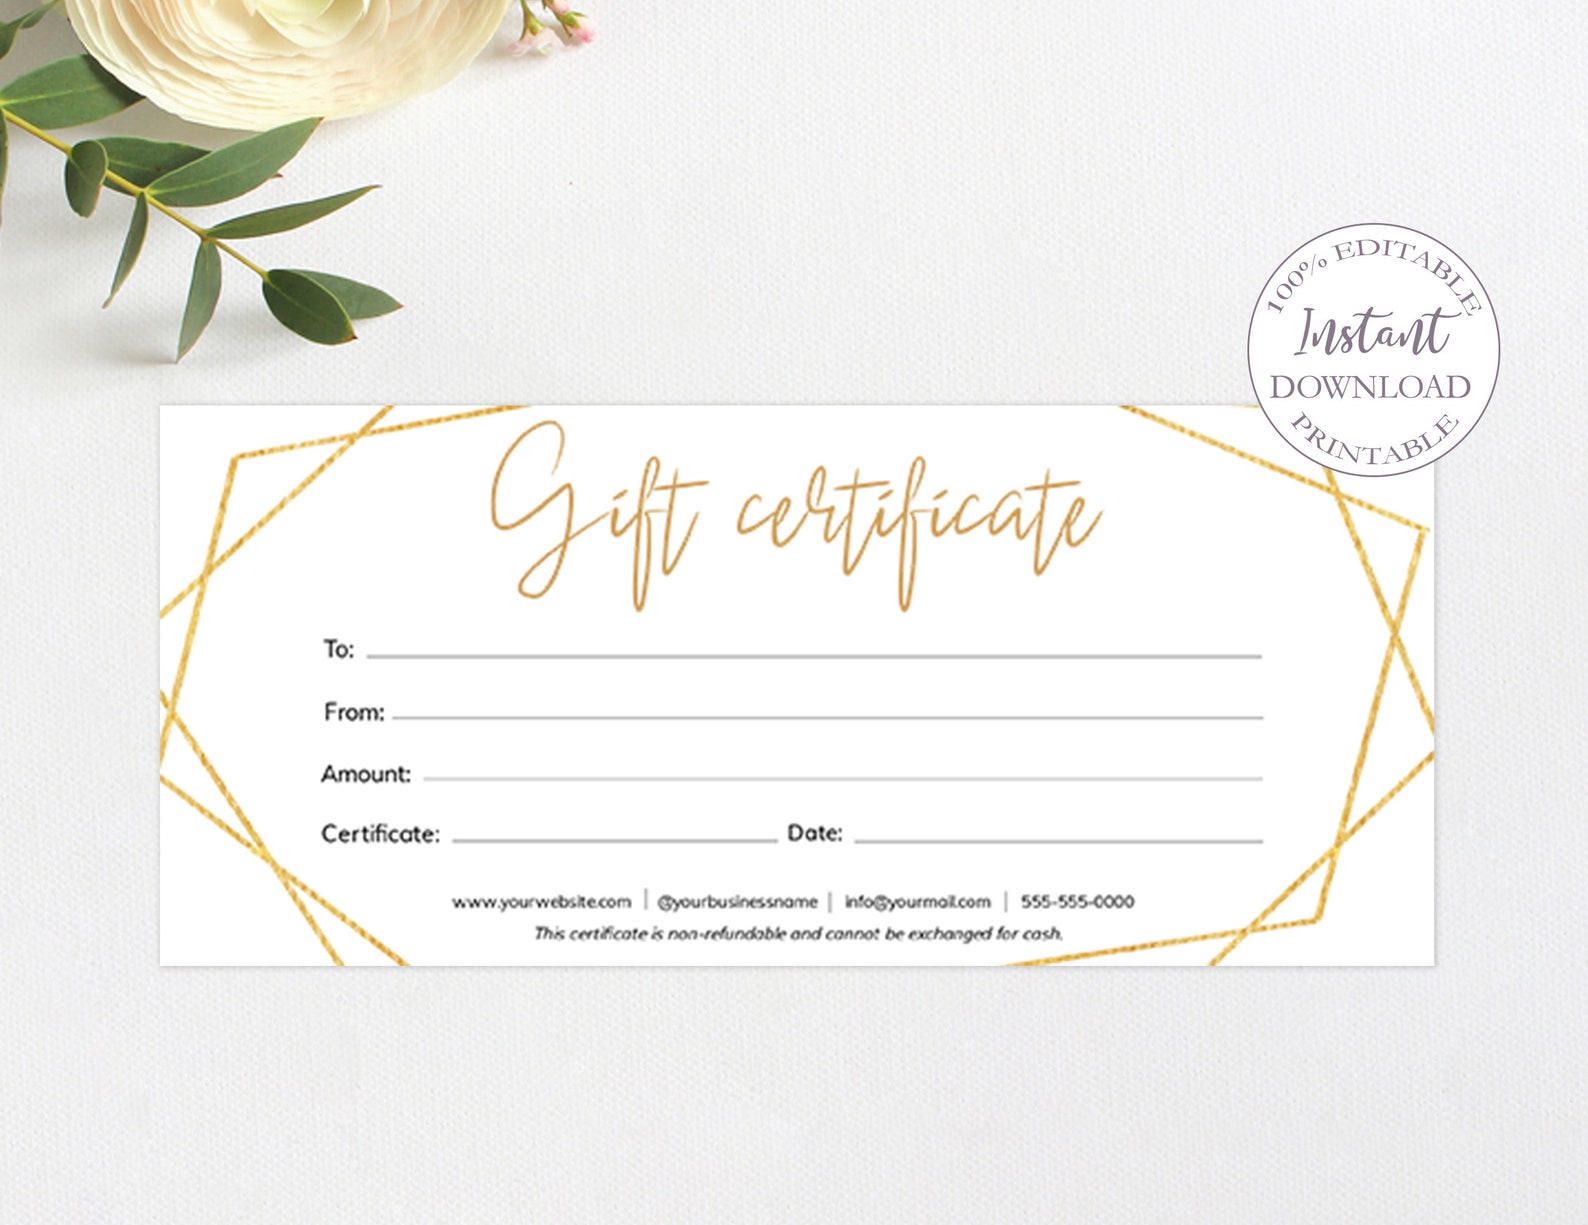 Gift Certificate Digital File Fathers Day Gift Ideas Etsy